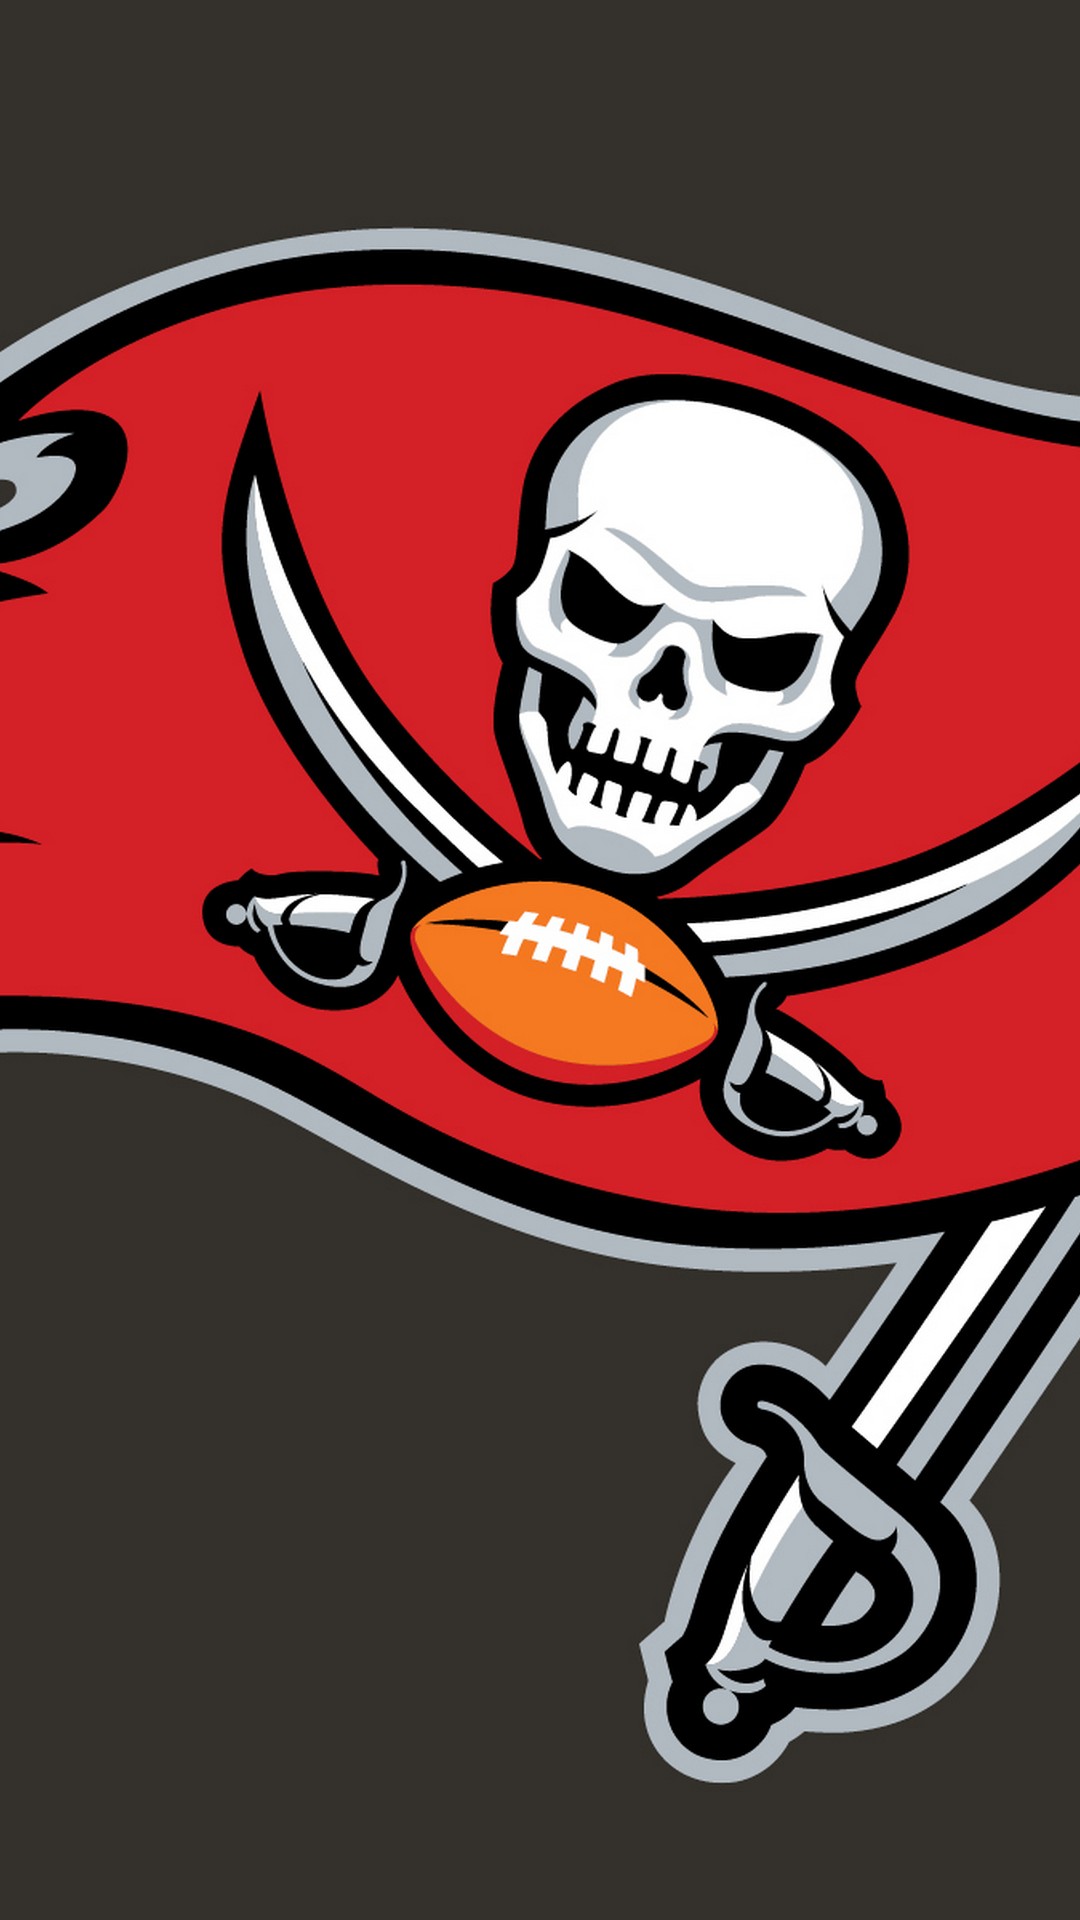 Tampa Bay Buccaneers Logo iPhone Wallpaper New with high-resolution 1080x1920 pixel. Donwload and set as wallpaper for your iPhone X, iPhone XS home screen backgrounds, XS Max, XR, iPhone8 lock screen wallpaper, iPhone 7, 6, SE and other mobile devices